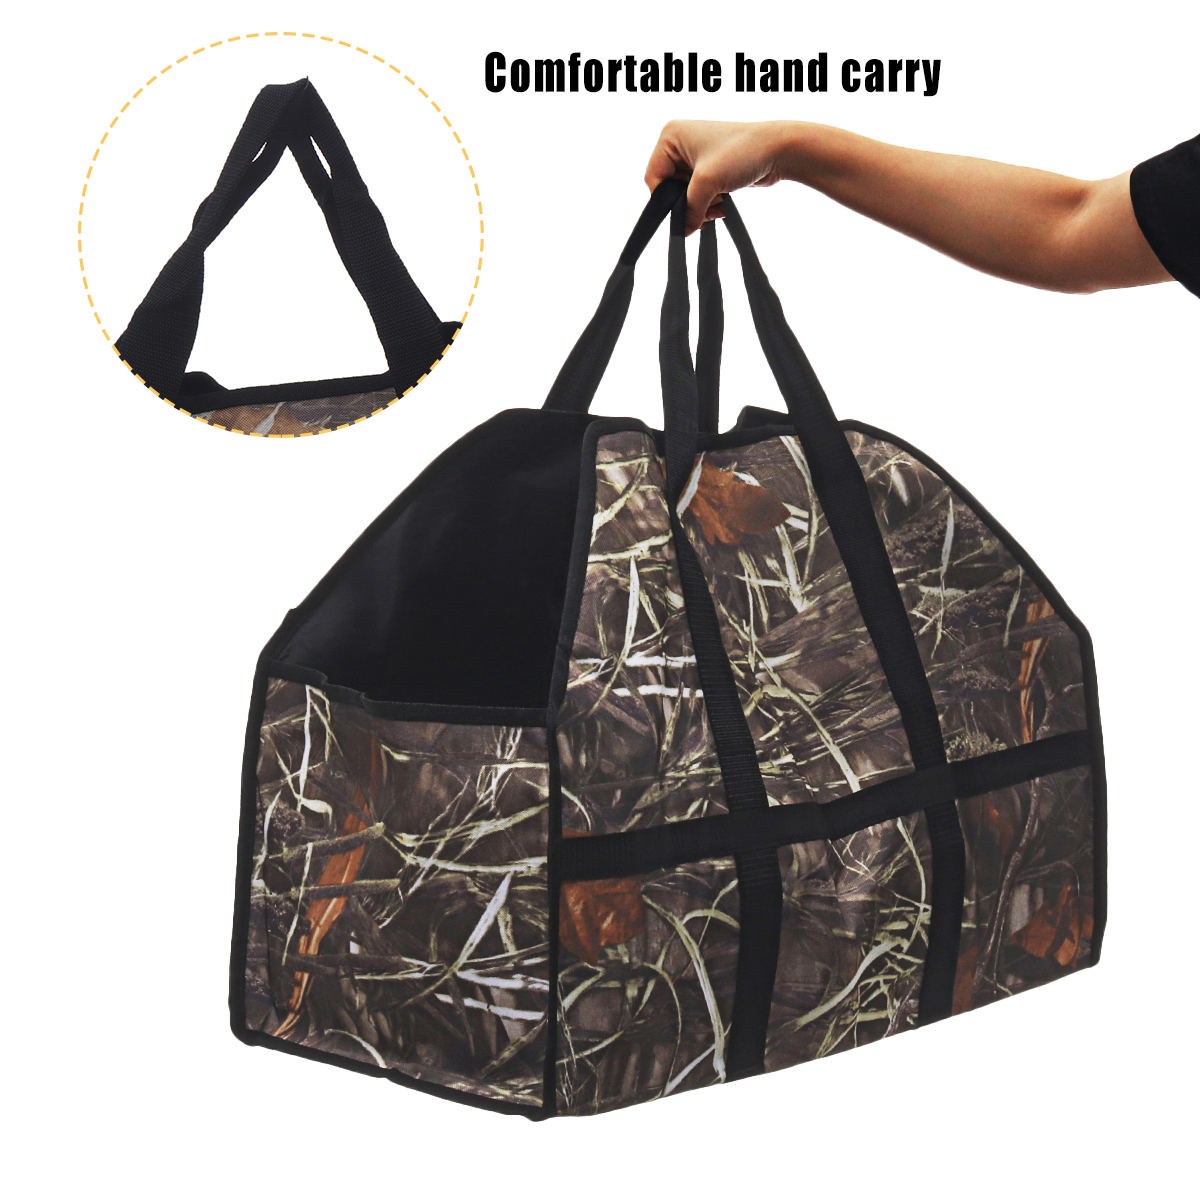 210D-Oxford-Cloth-Firewood-Carrier-Bag-Wood-Holder-Storage-Bag-Tote-Organizer-Outdoor-Camping-Picnic-1764243-8